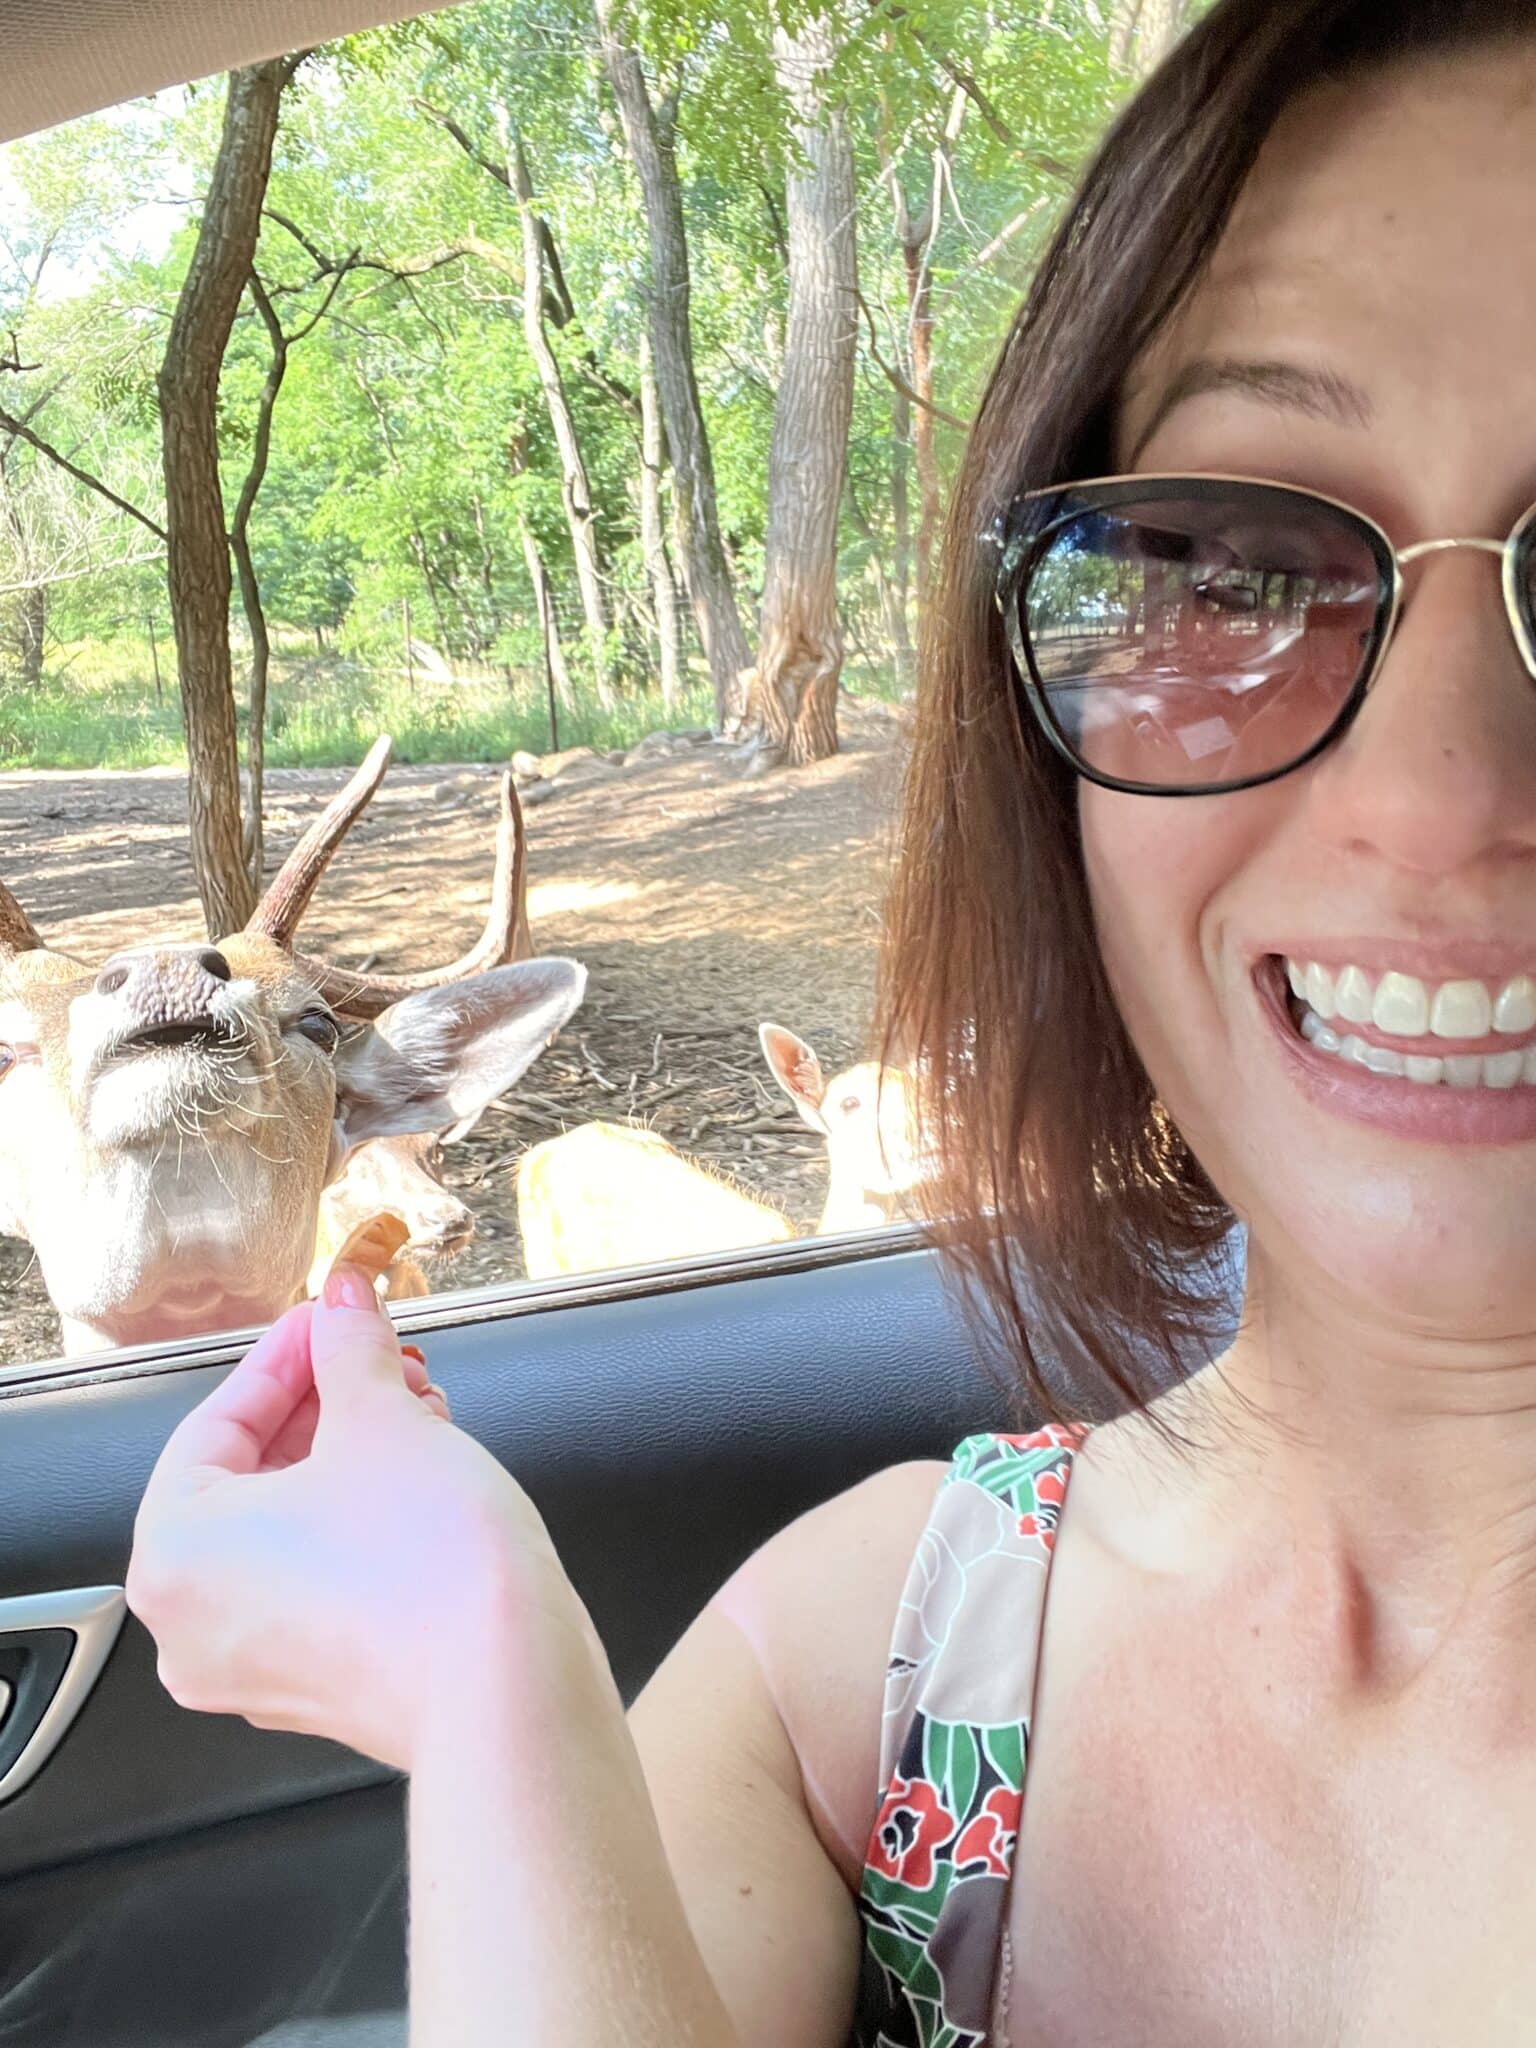 Lindsey taking a selfie feeding the deer at a drive-through safari in Wisconsin